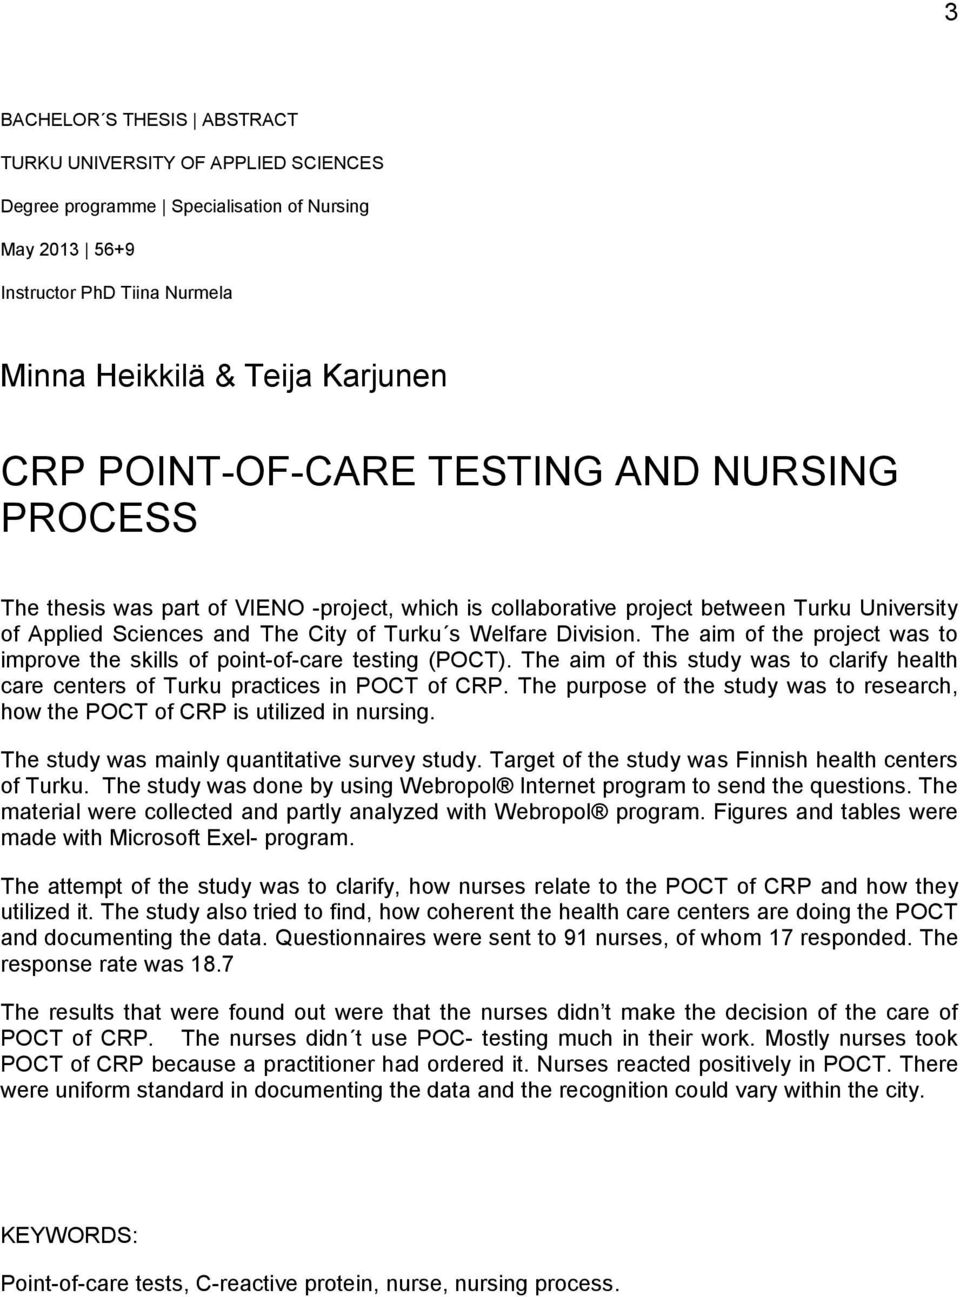 The aim of the project was to improve the skills of point-of-care testing (POCT). The aim of this study was to clarify health care centers of Turku practices in POCT of CRP.